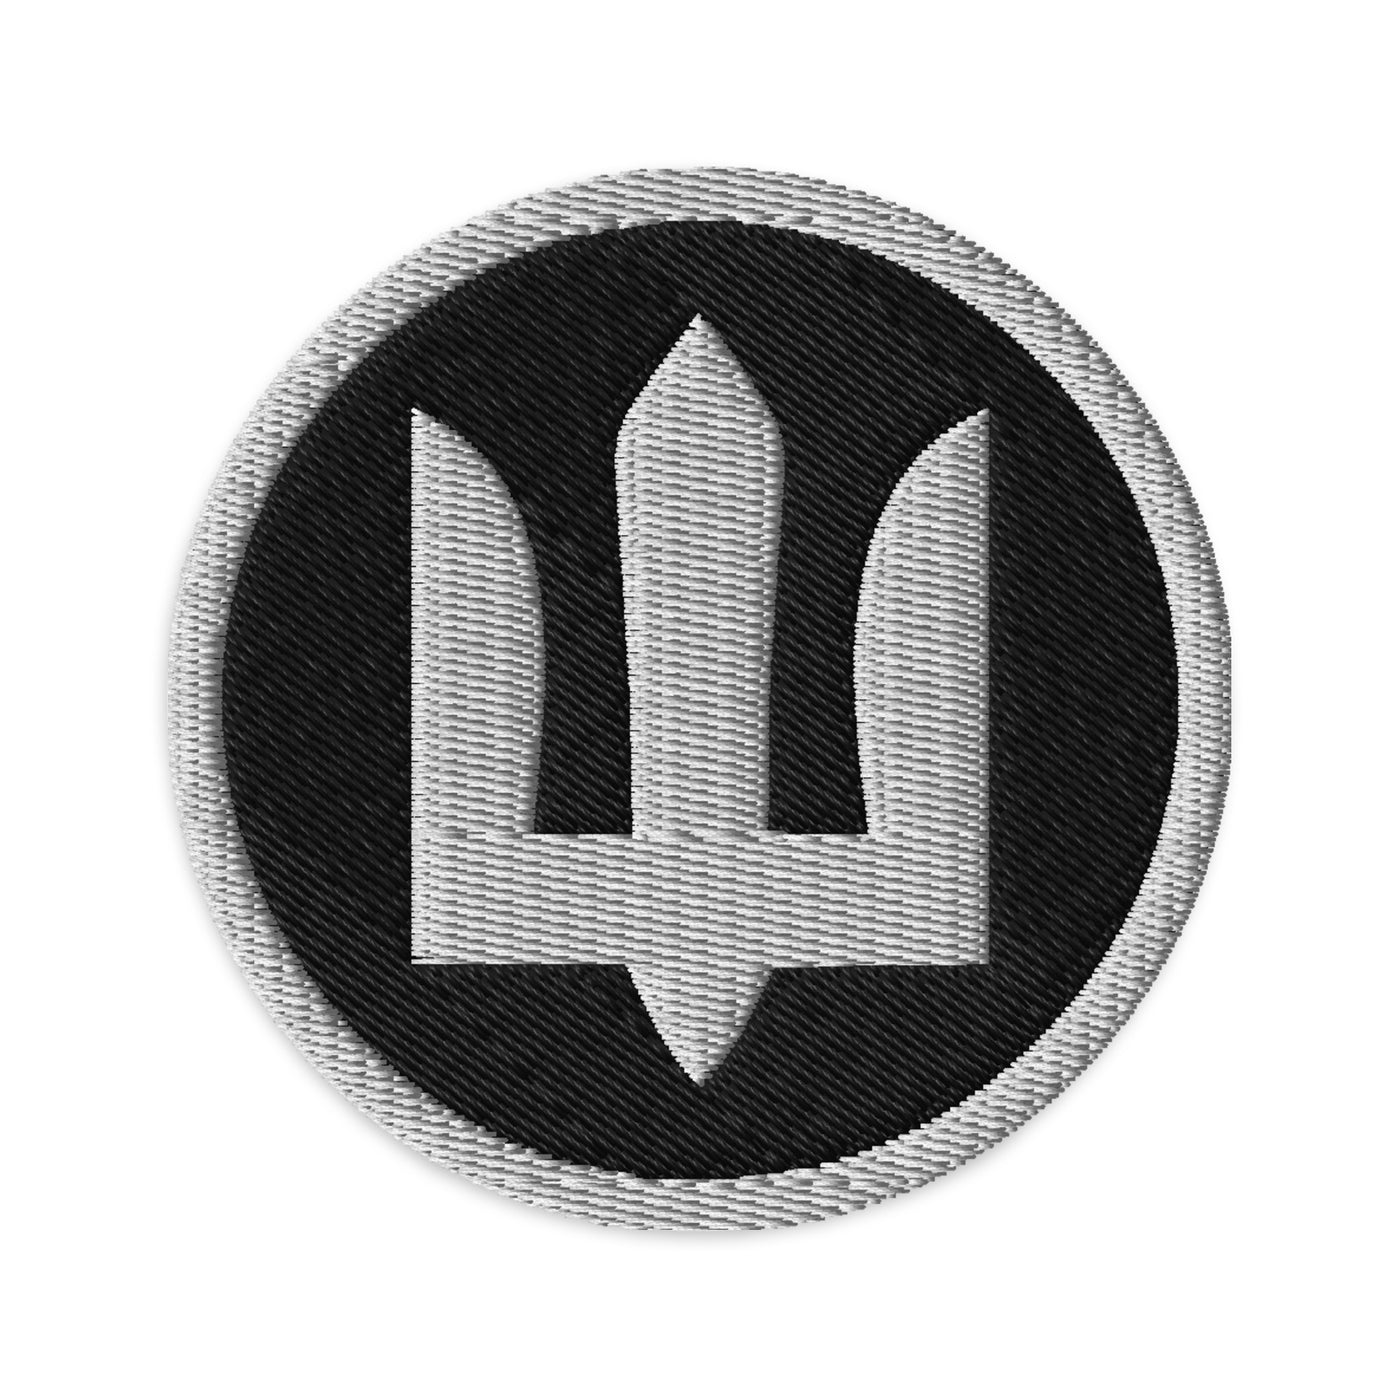 Ukrainian Military Emblem 1 Embroidered Patch